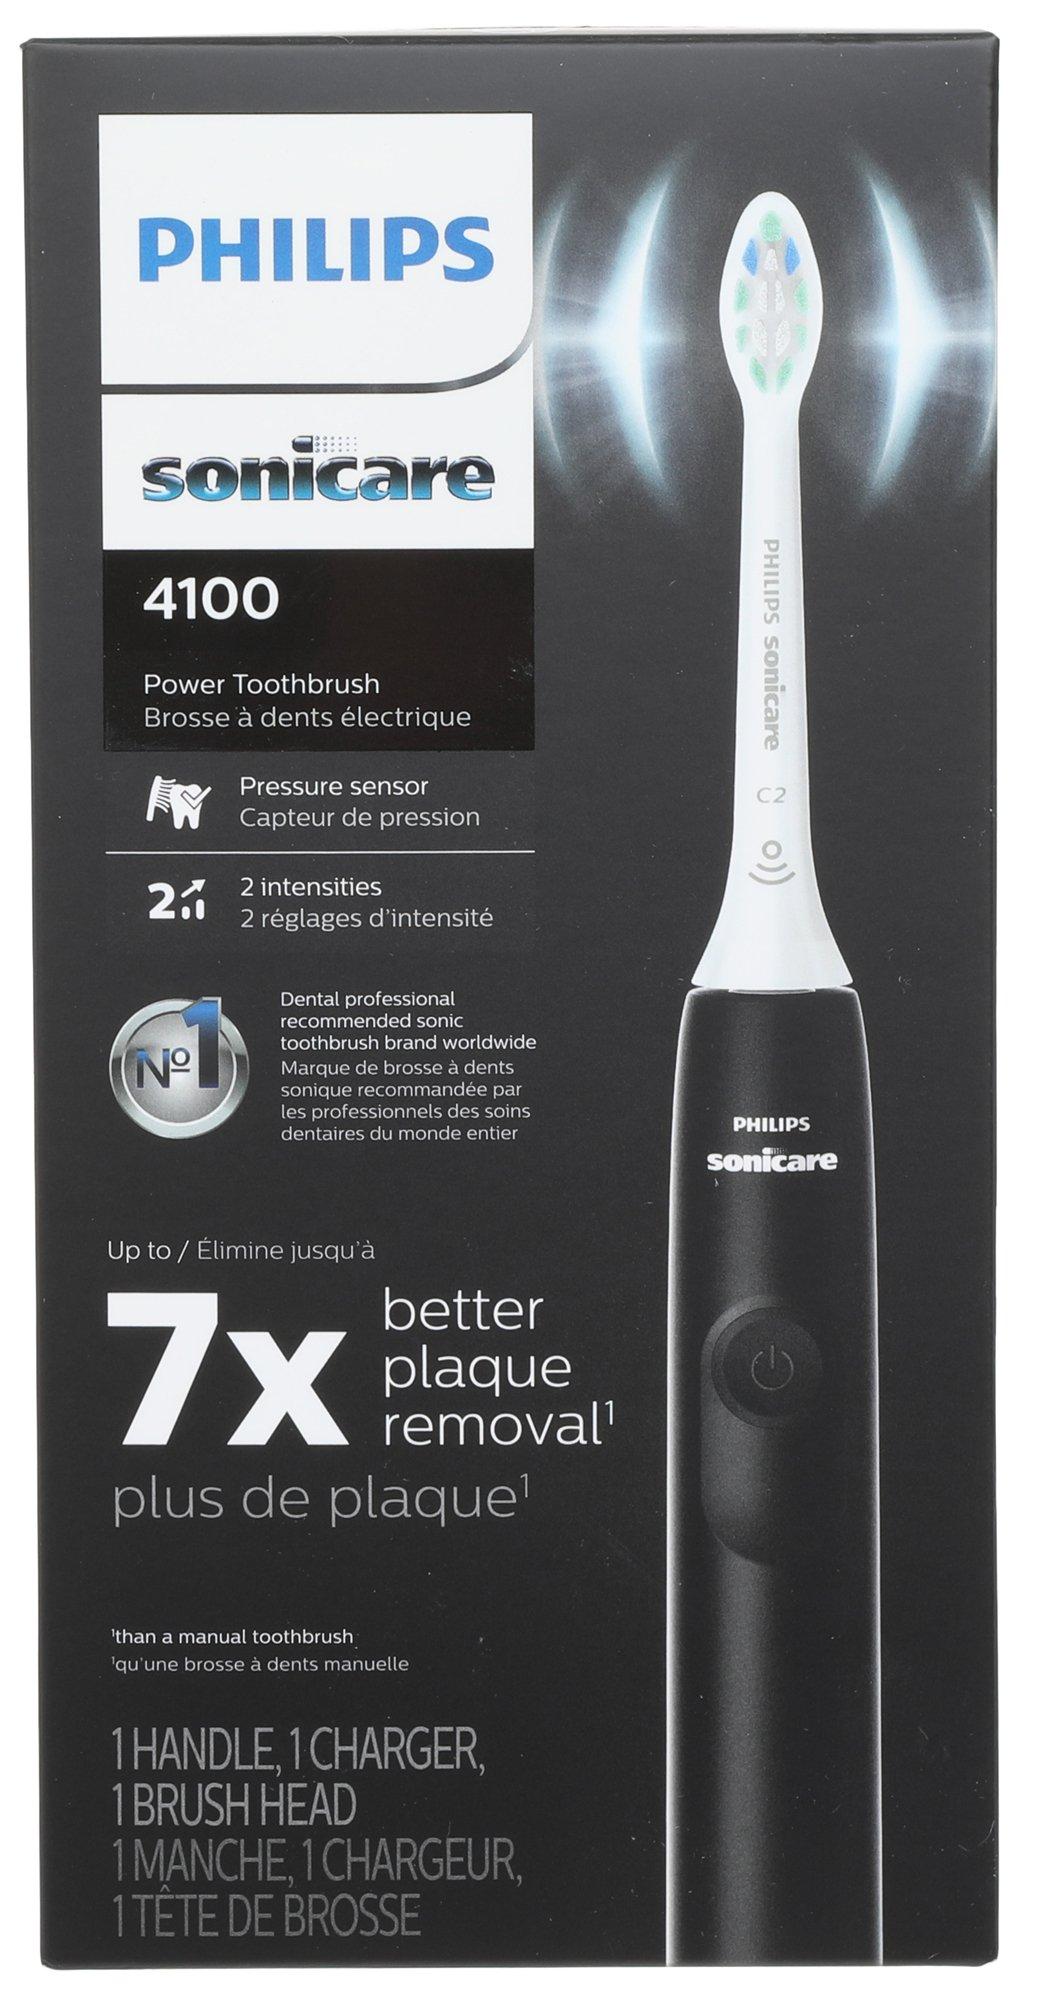 Sonicare 4100 Rechargeable Power Toothbrush